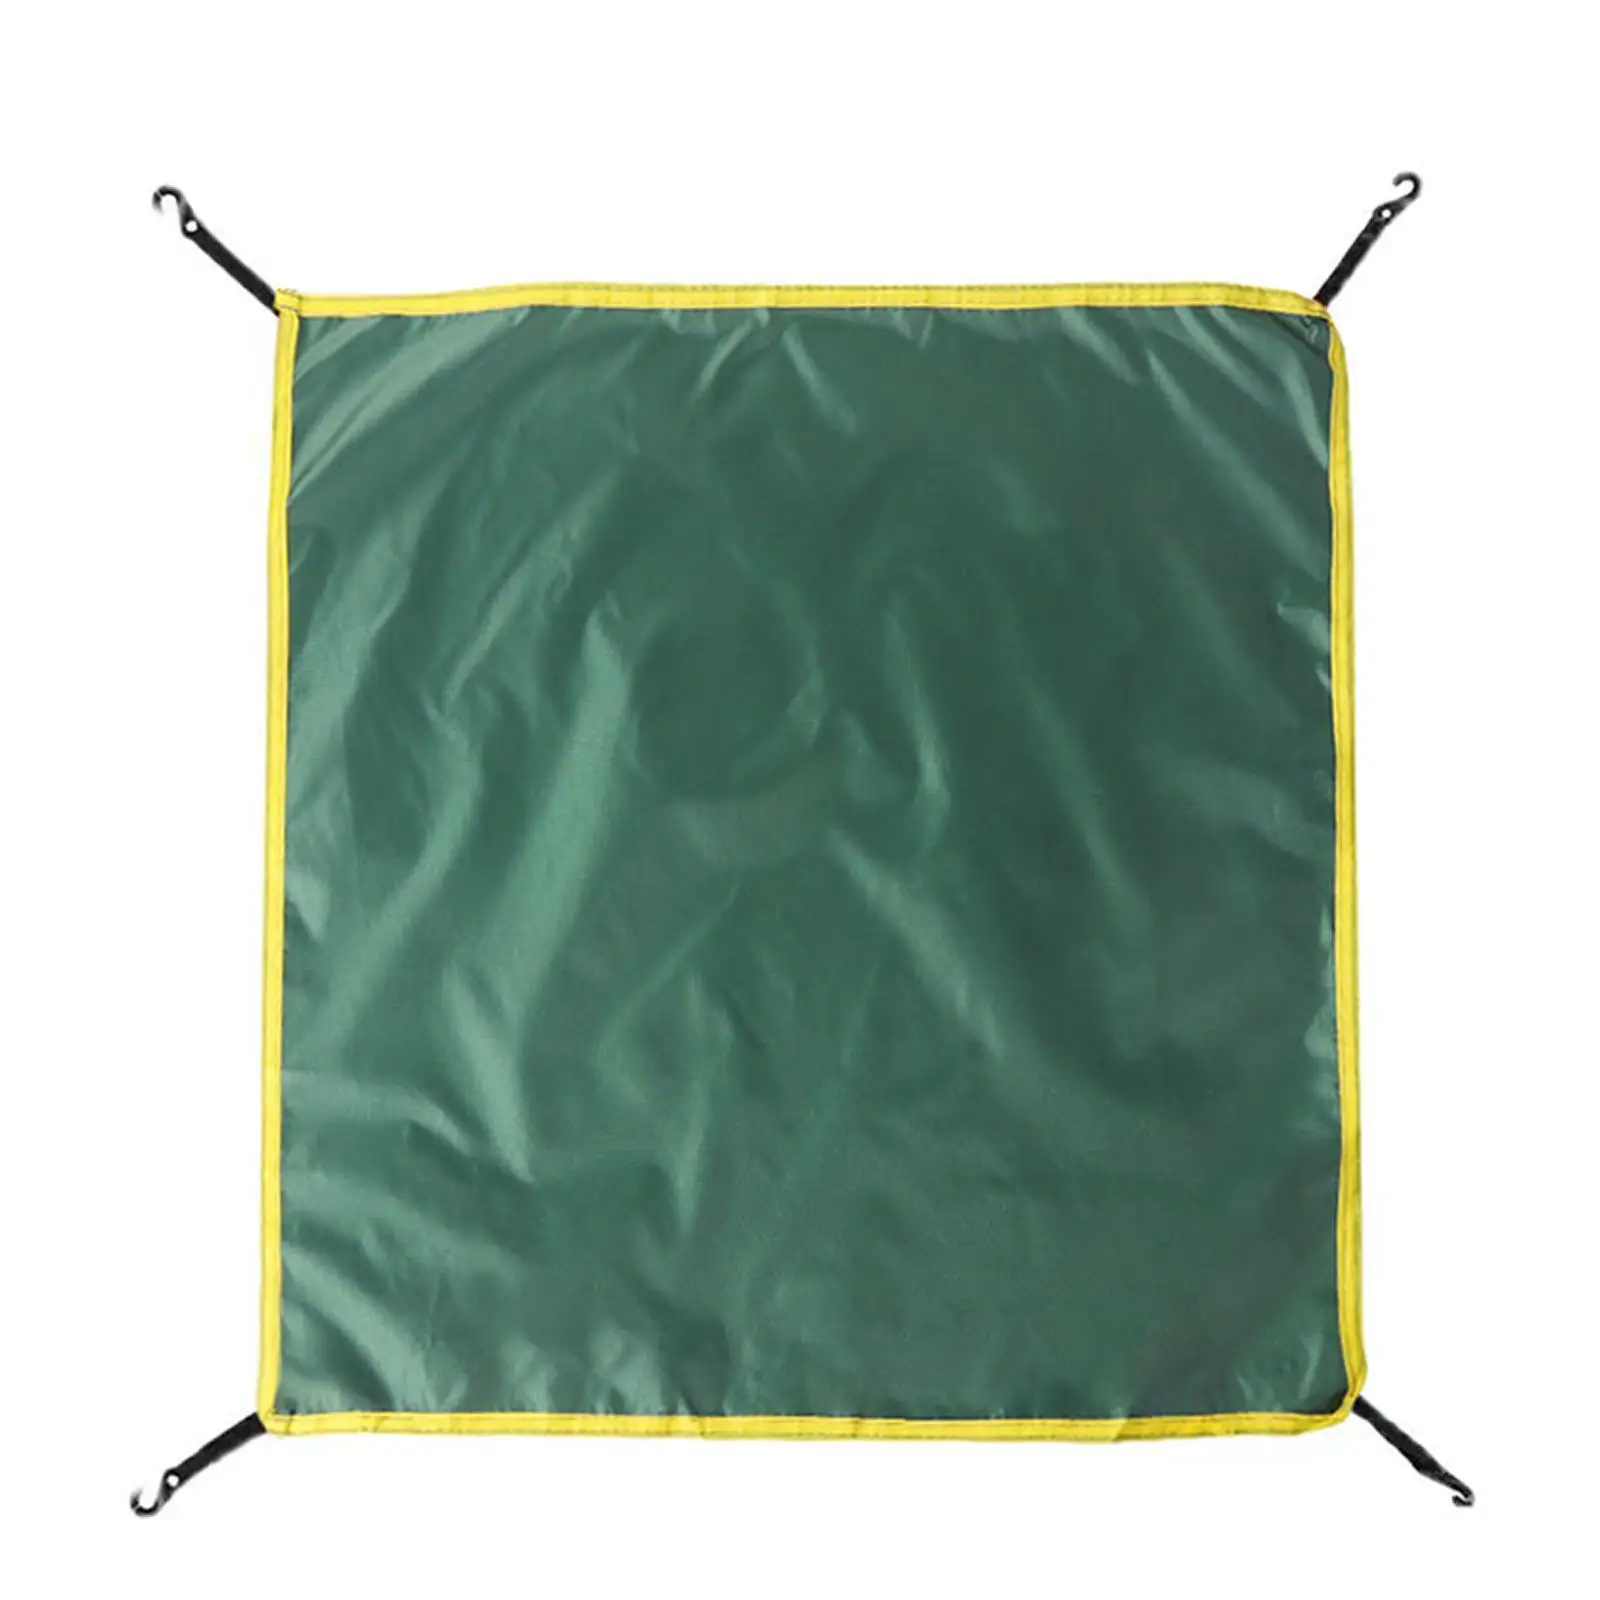 Rainfly Fits 3-4 Person Instant Tent Rainproof for Backpacking Travel Outdoor Supplies